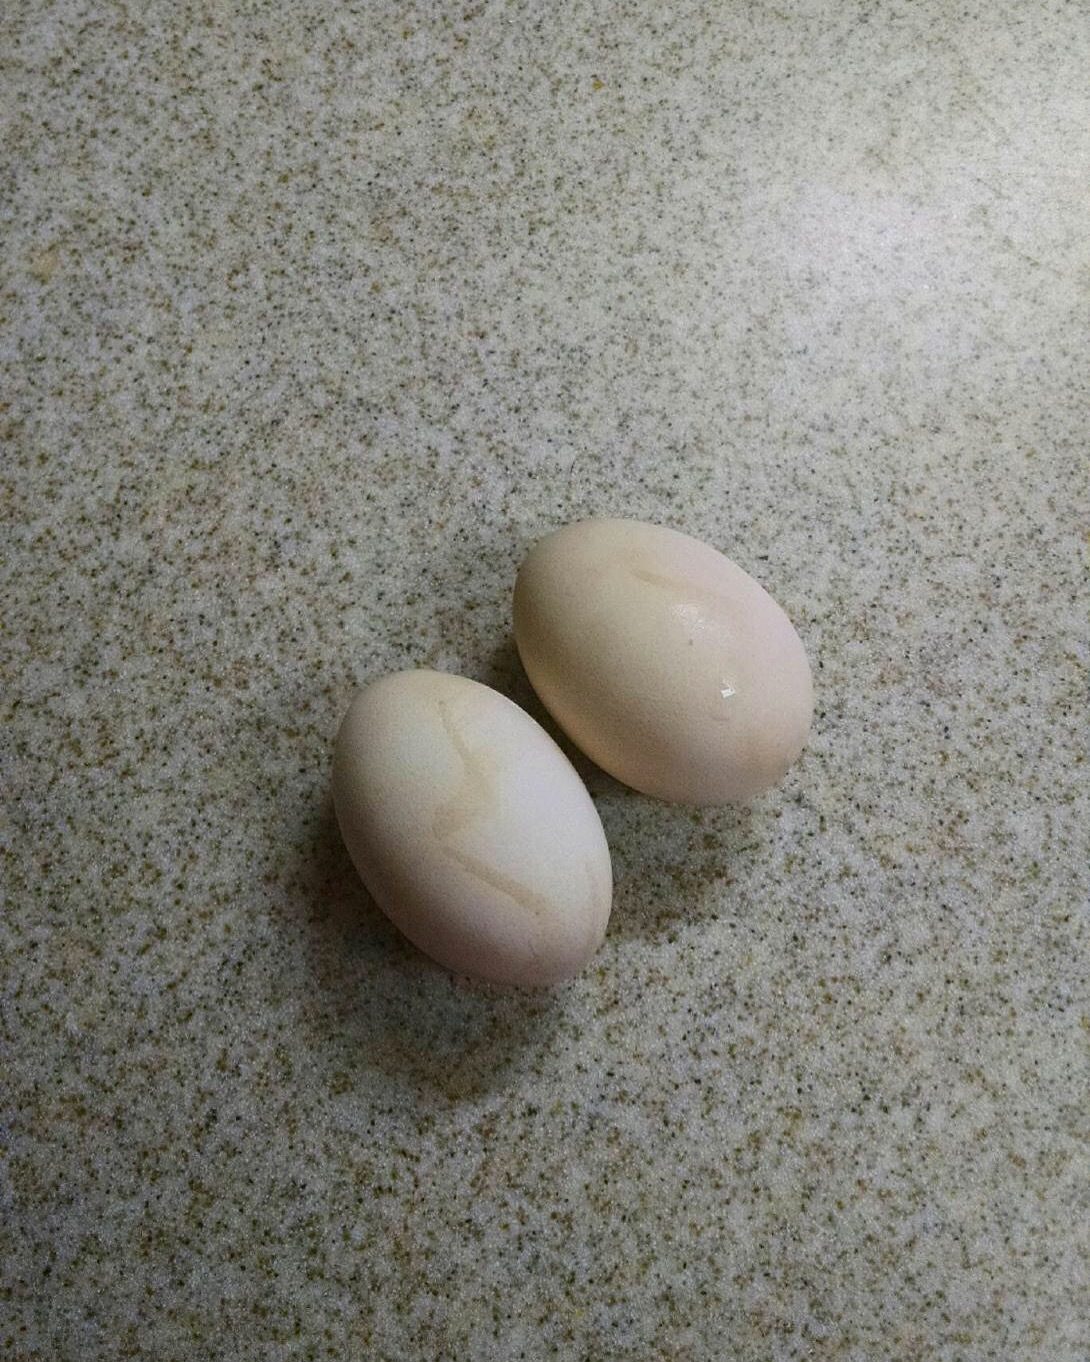 Our first Bantam eggs. She started laying Easter Day. I thought that was neat!